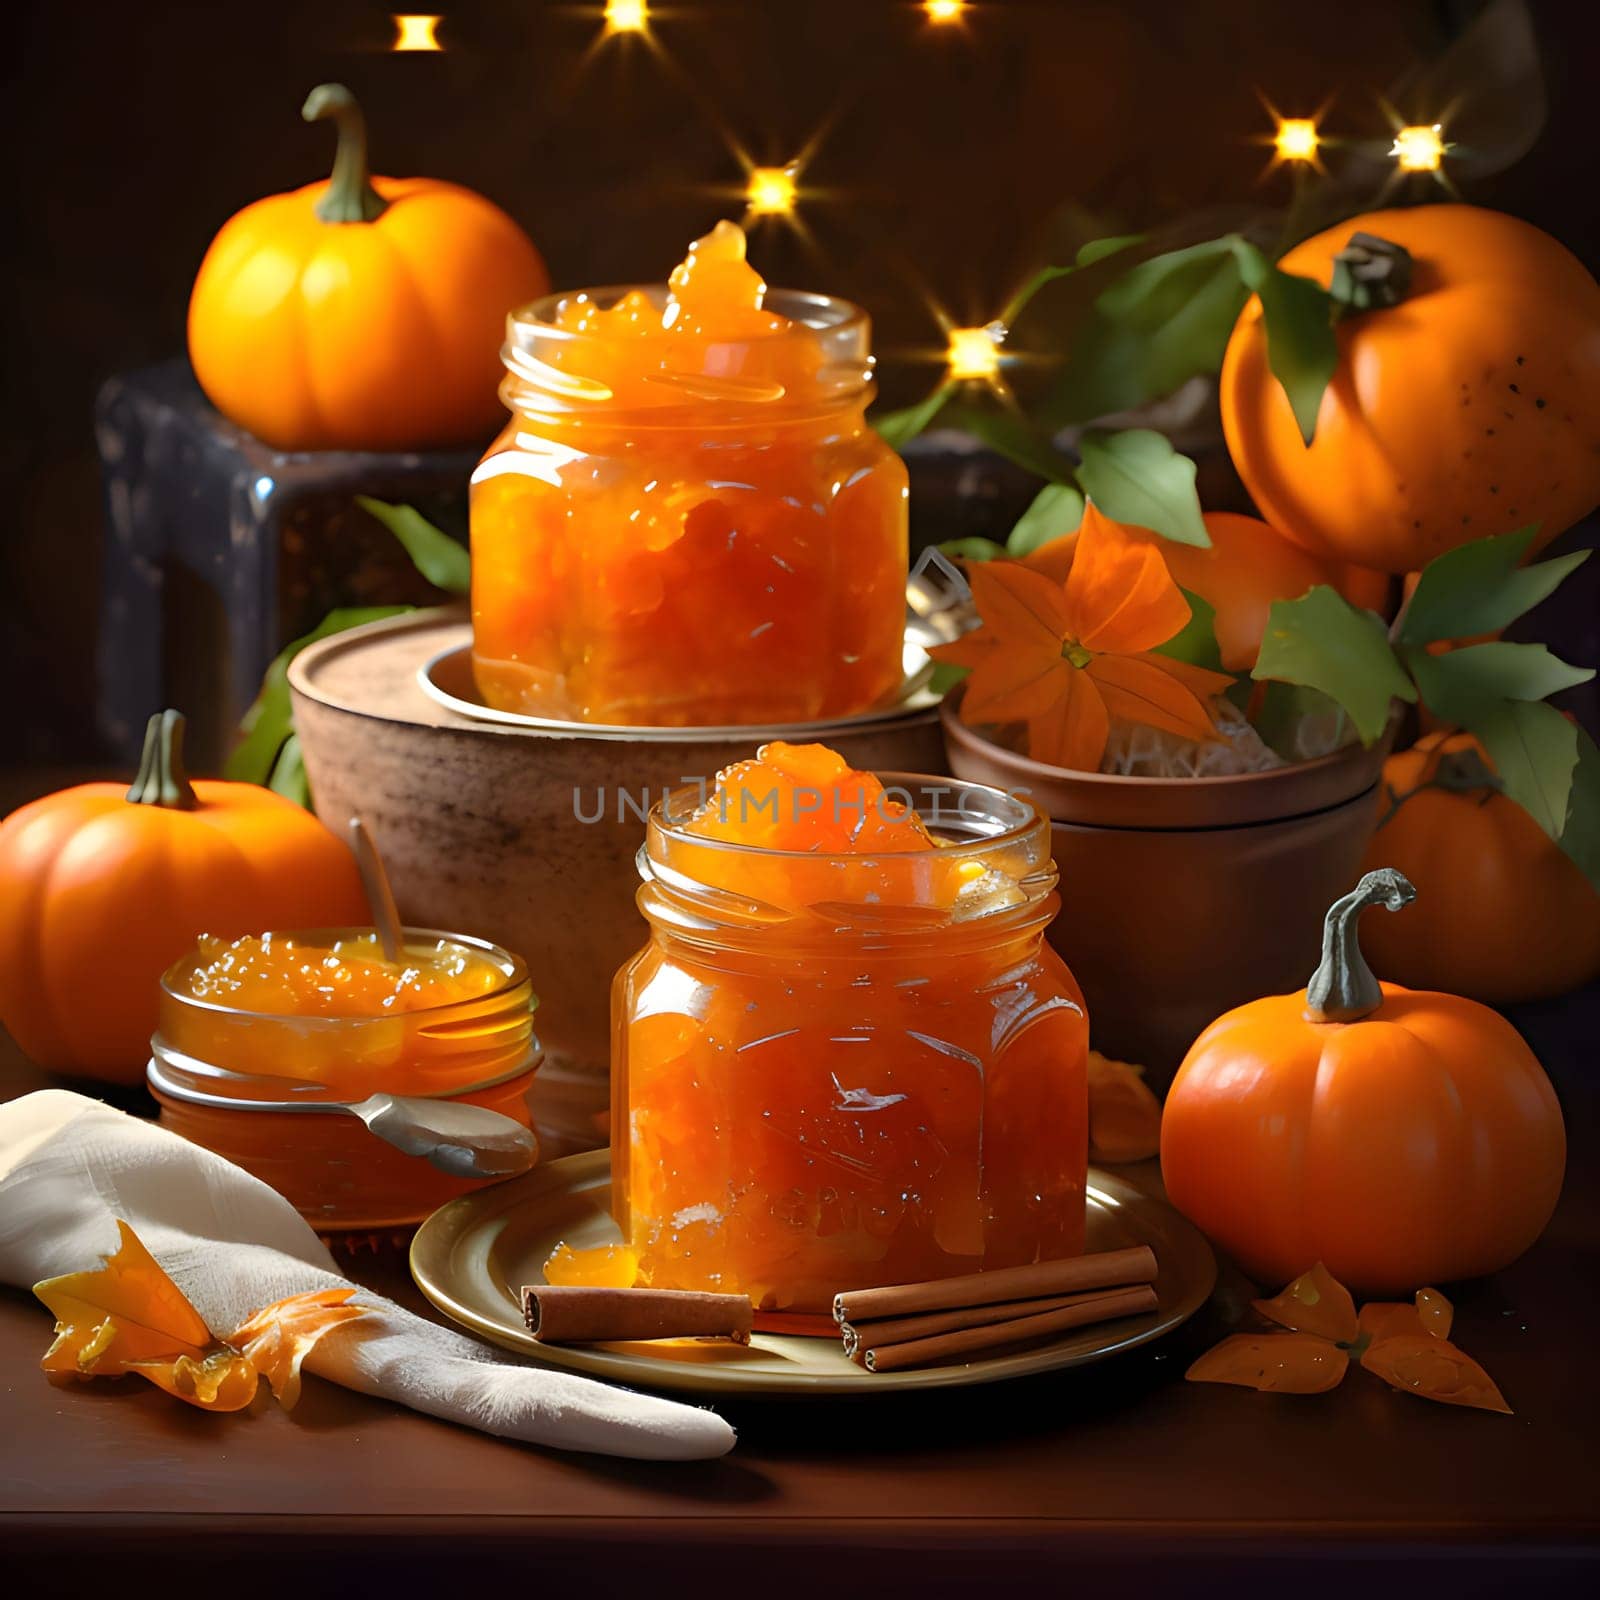 Jelly and Pumpkin Mousses in glass jars around pumpkin leaves. Pumpkin as a dish of thanksgiving for the harvest. An atmosphere of joy and celebration.